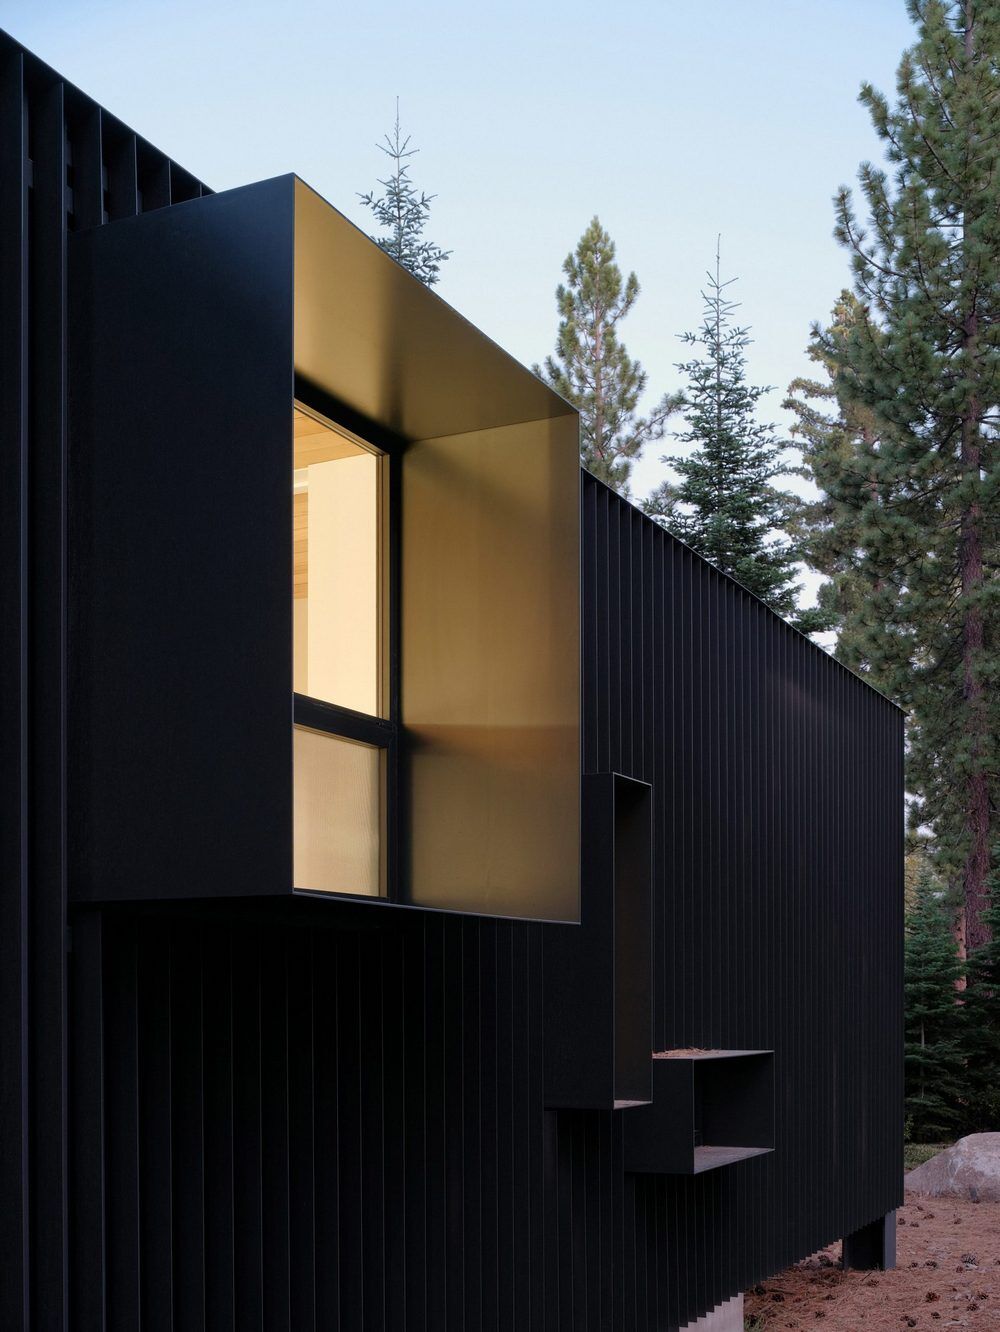 Forest Vacation Home by Faulkner Architects in Truckee, California